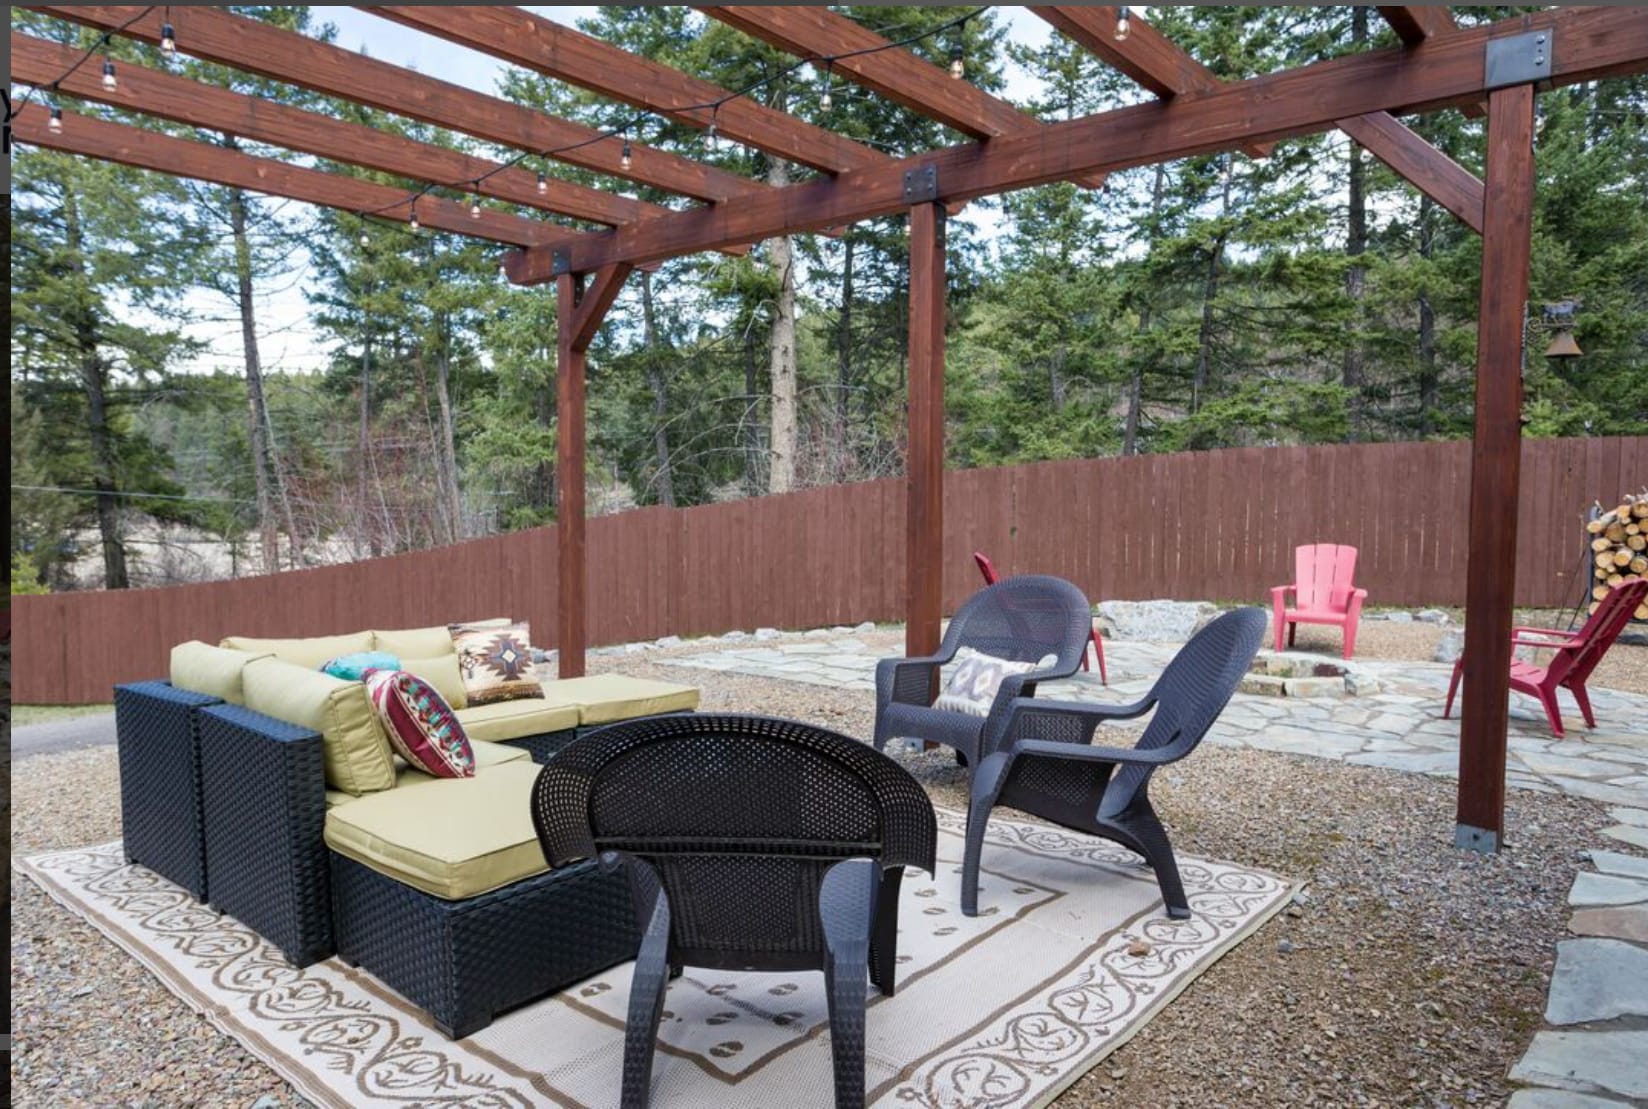 Lit up pergola next to firepit, grill available